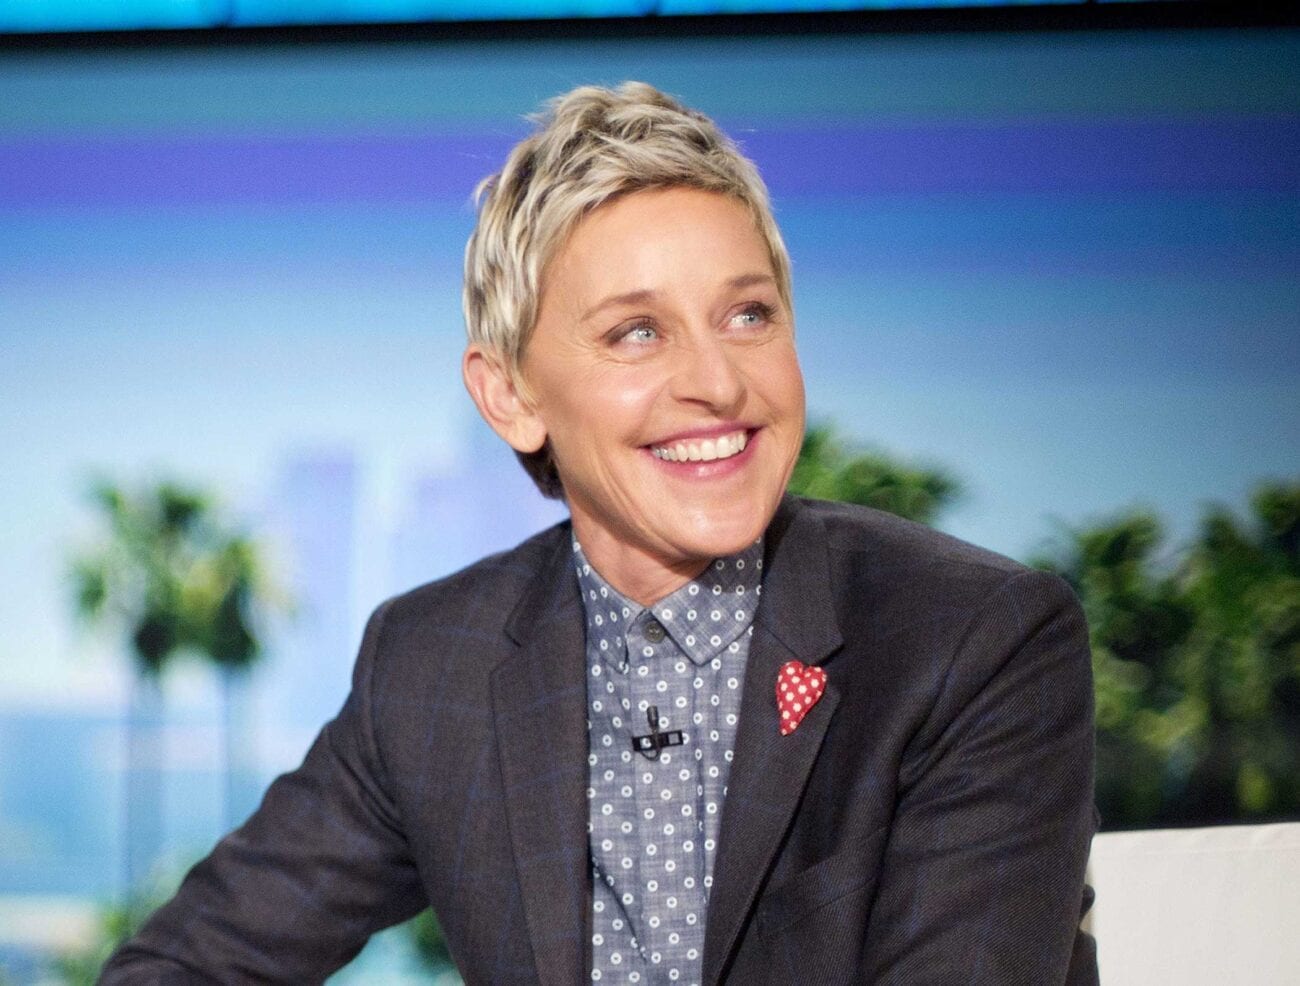 People are starting to wonder what a potential cancellation means for Ellen DeGeneres, her career, and her net worth. Here's what we know.